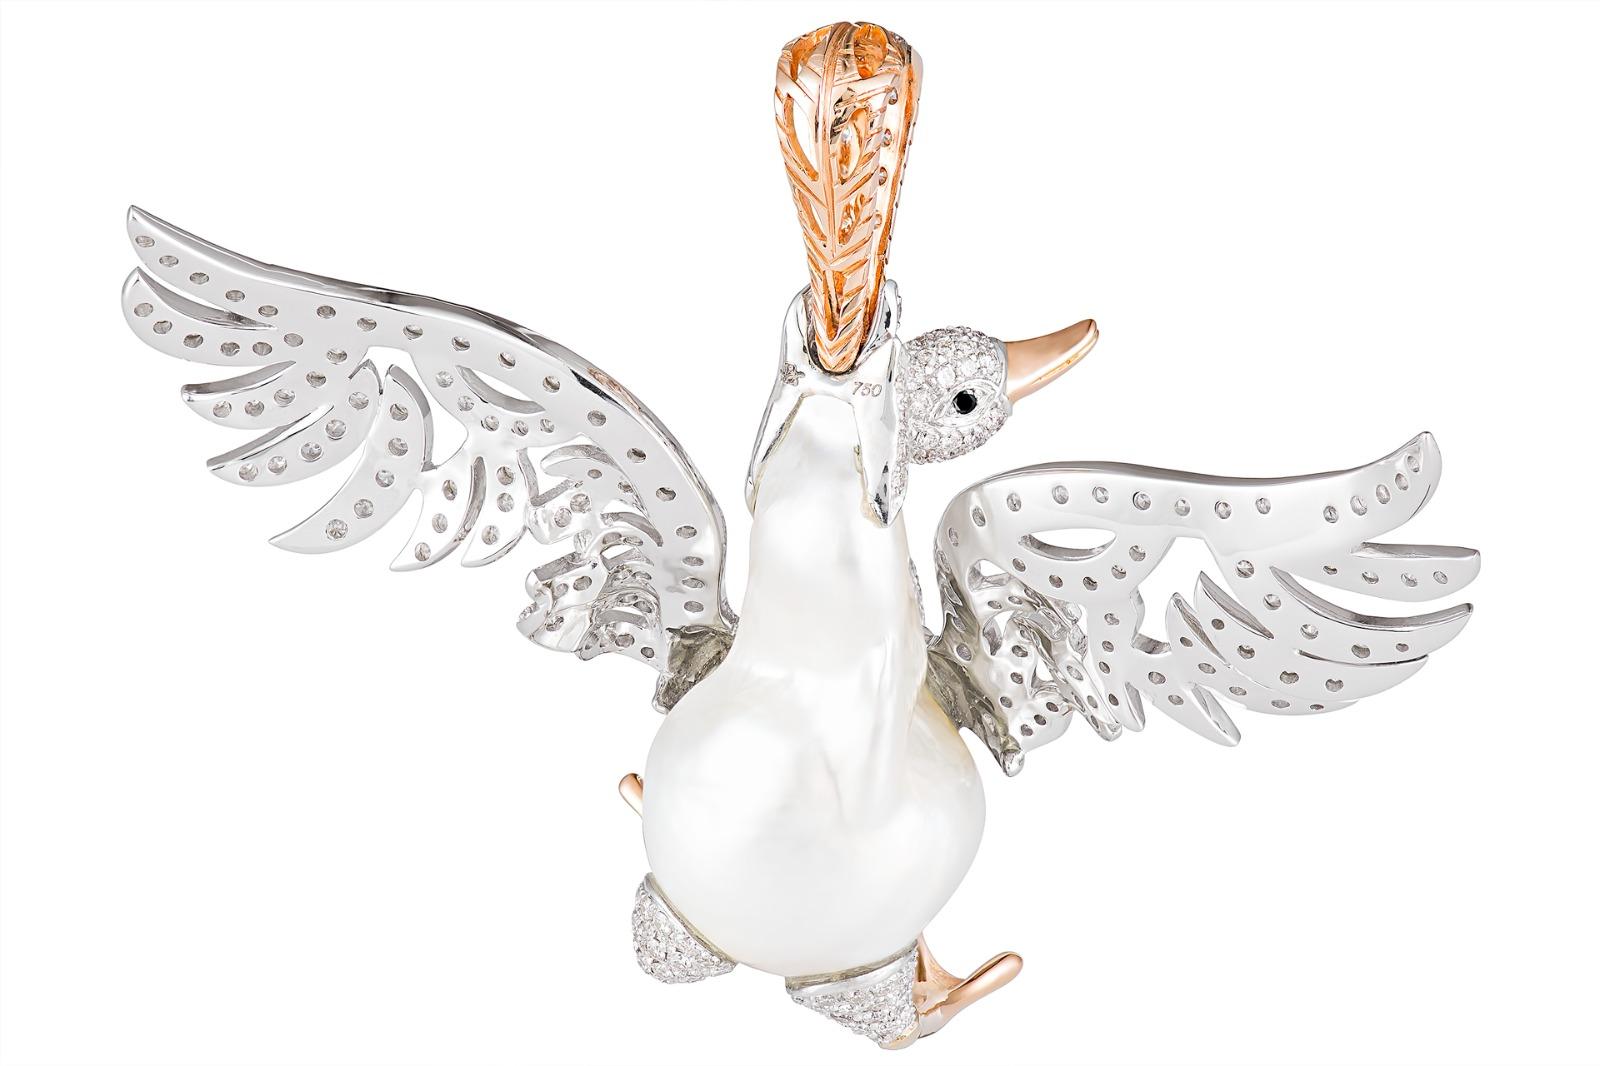 This one of a kind swan pendant is an exceptional example of Buzzanca unique animal collection pieces.  The Australian baroque pearl is effortlessly transformed into the swan's body and tail.  Carefully selected diamonds glitter in her open wings as